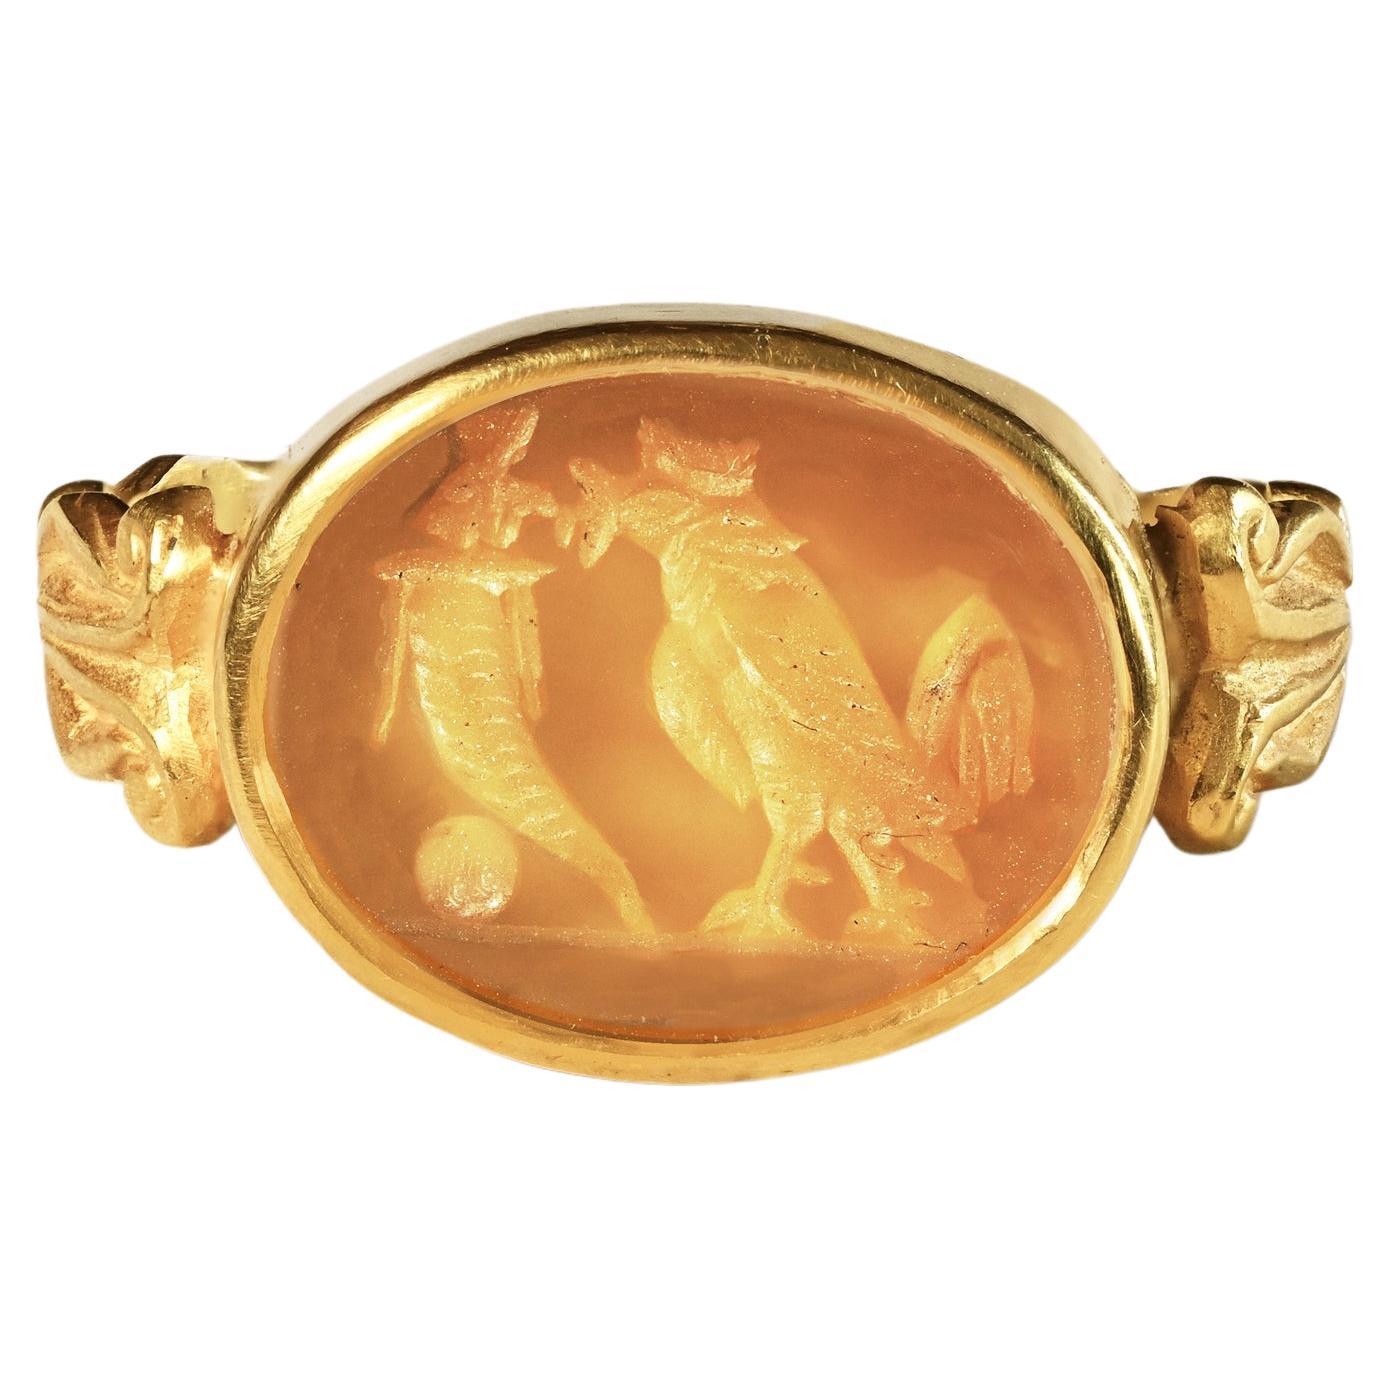 This 18 Kt Gold ring features an authentic Roman carnelian intaglio from the 1st-2nd century AD. The intaglio portrays Rooster and Cornucopia.
In ancient Greek and Roman societies, the rooster held significant symbolism, often associated with